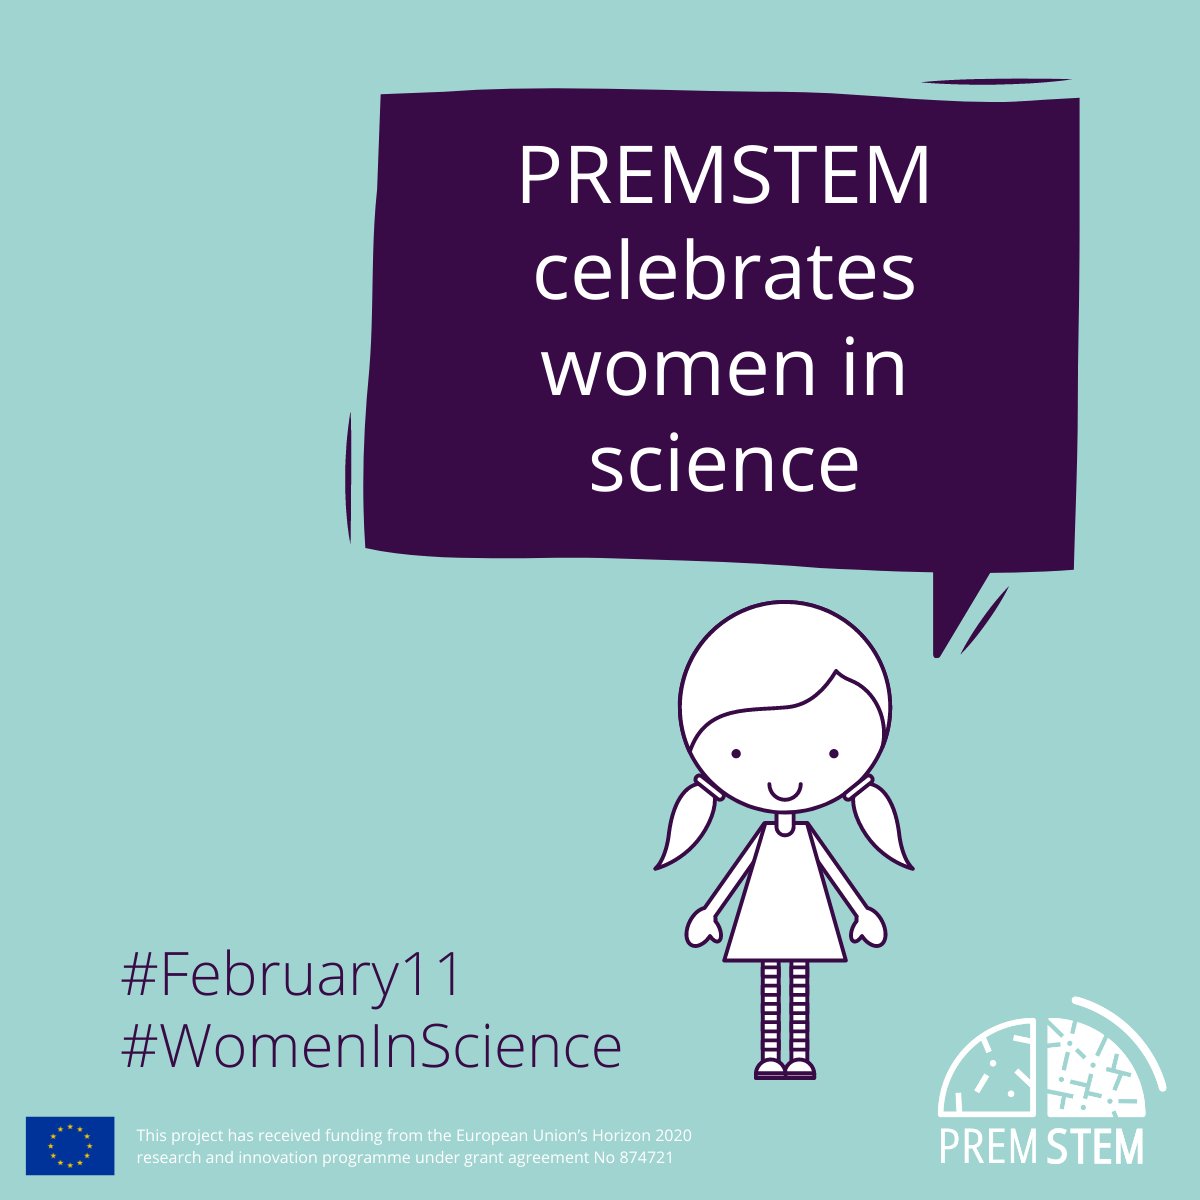 On #IDWGS this #February11 find out why #premstem #WomenInScience like working in #science and #research! 🔬 Till then, why not recap on last year's #interviews with researchers @RijtSabine from @MaastrichtU and Ezgi Şengün from @radboudumc? ➡️ premstem.eu/2021/02/10/wom…